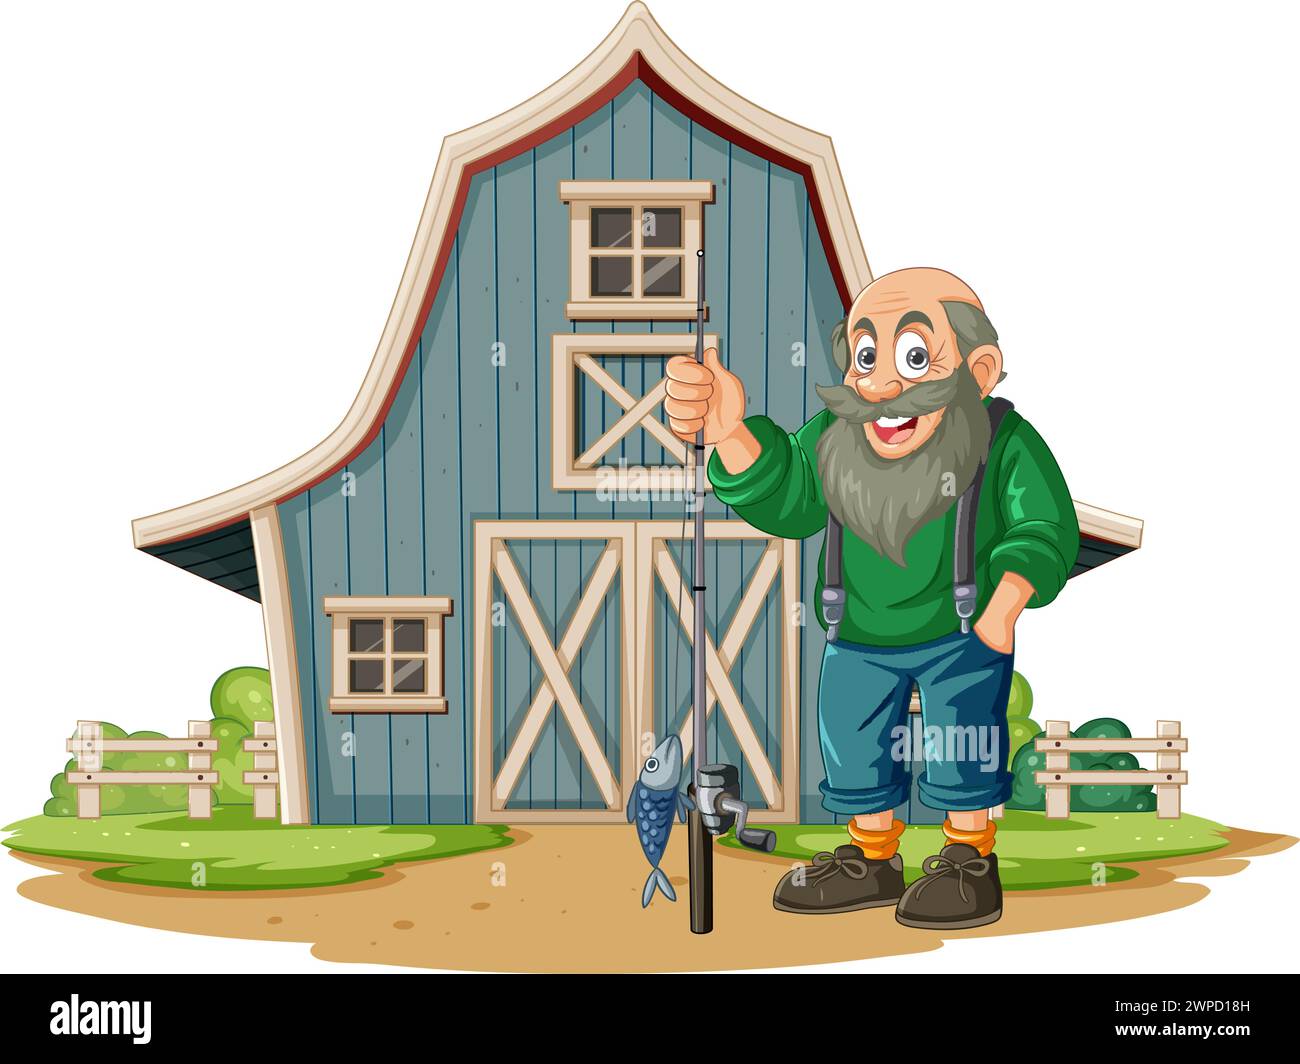 Cheerful old man with fish by a barn. Stock Vector